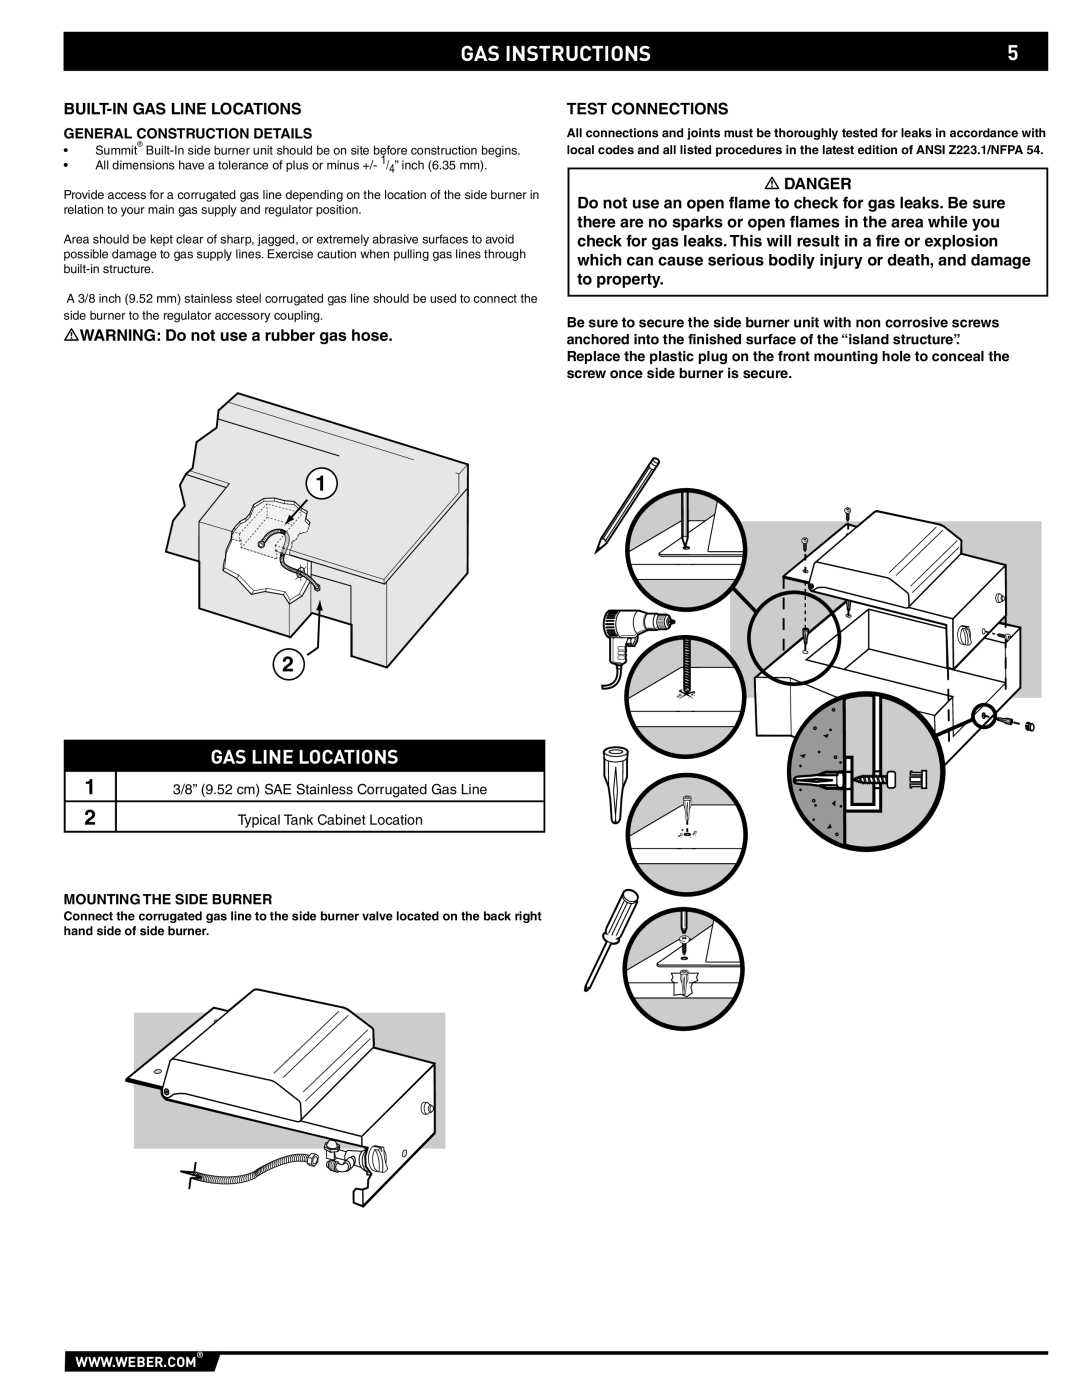 Weber 89796 manual Gas Instructions, Gas Line Locations, General Construction Details, Typical Tank Cabinet Location 